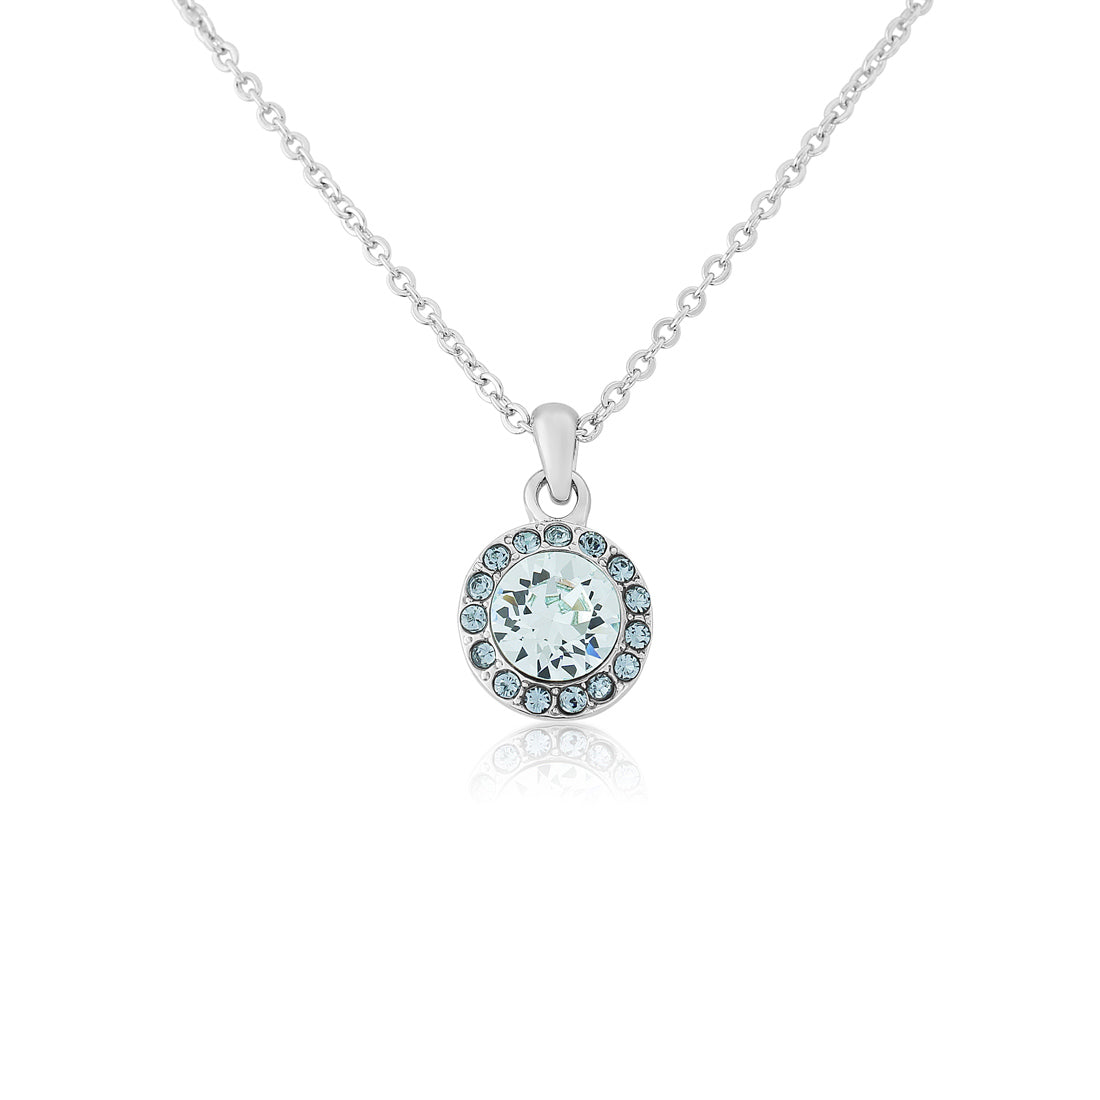 Waterfall of Love Blue Crystal Pendant Bridal Necklace